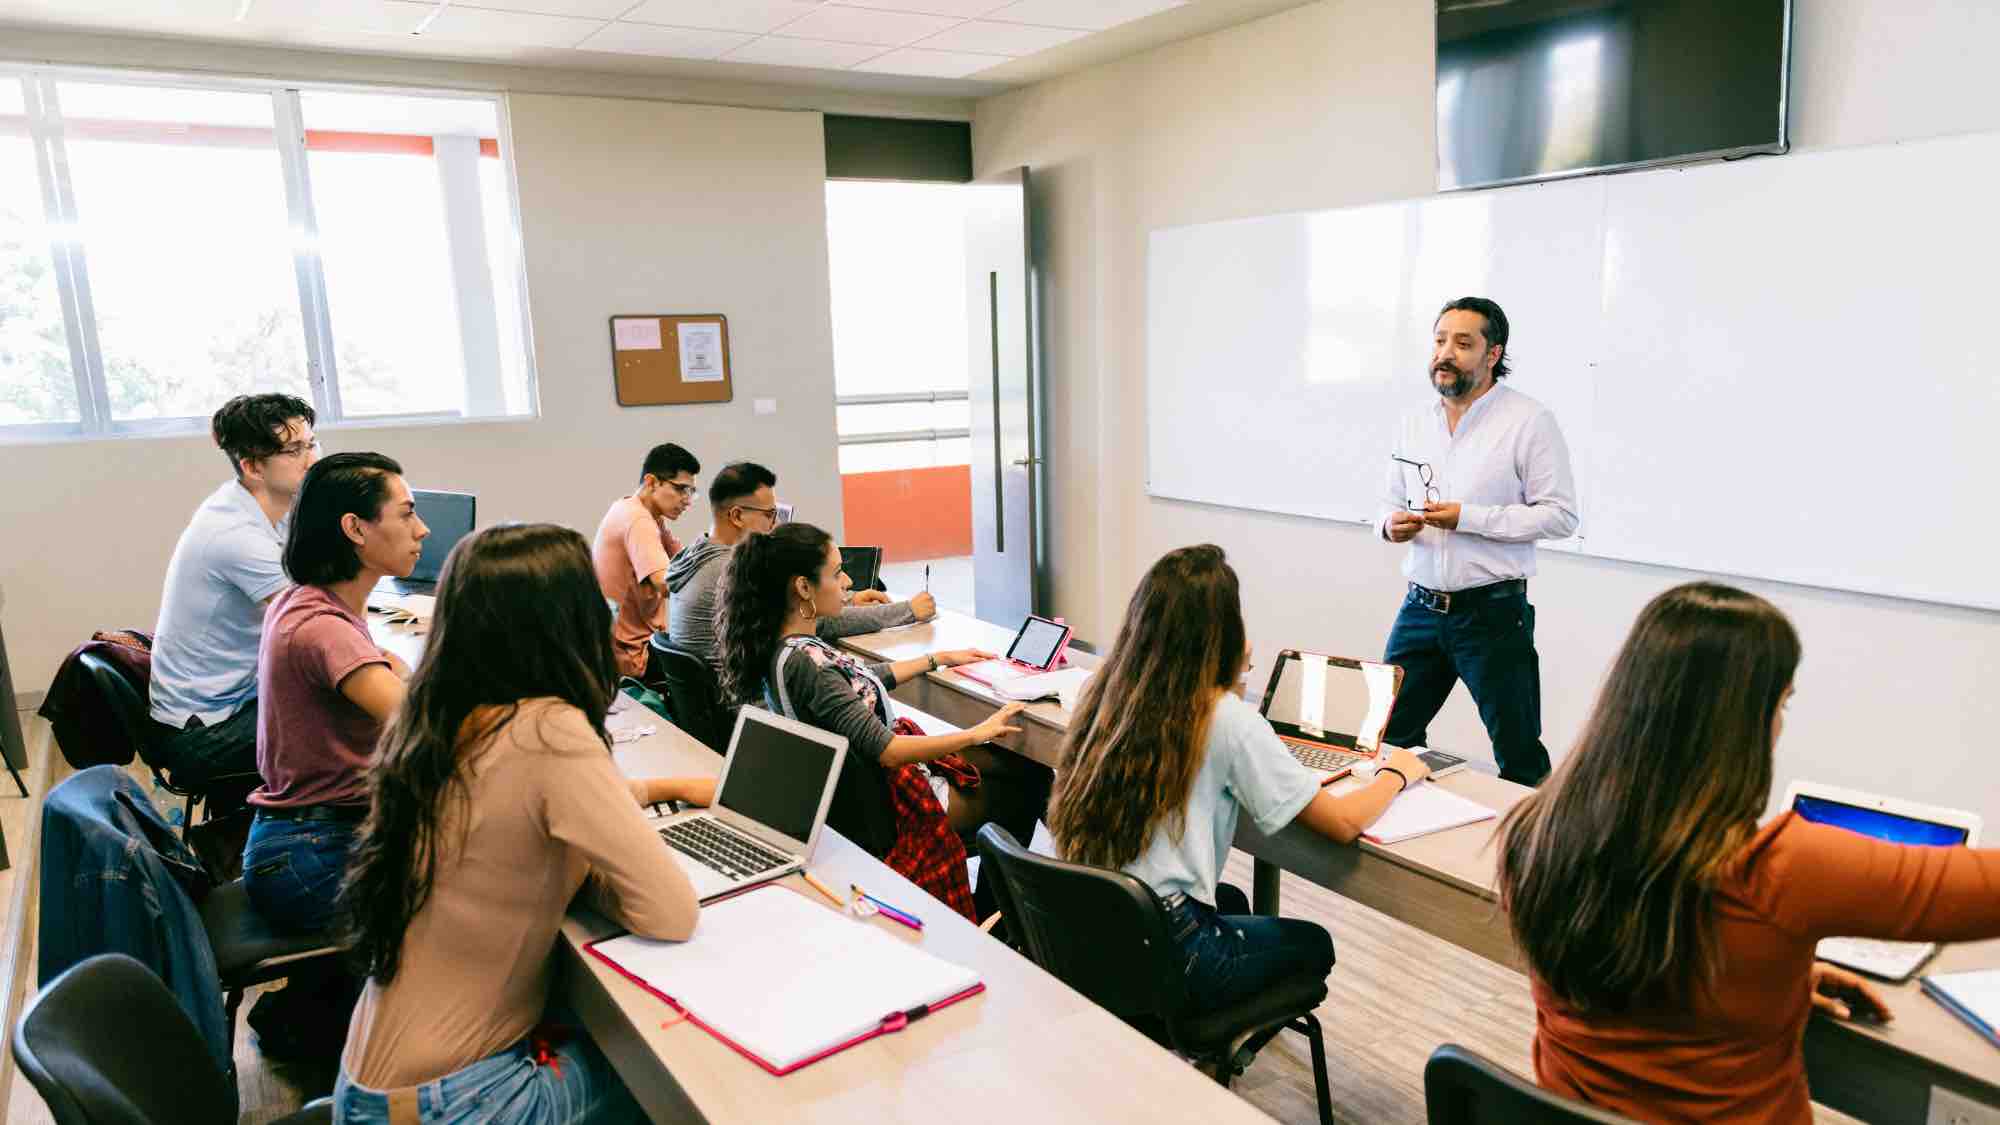 university classroom with instructor standing at the front and students at rows of tables